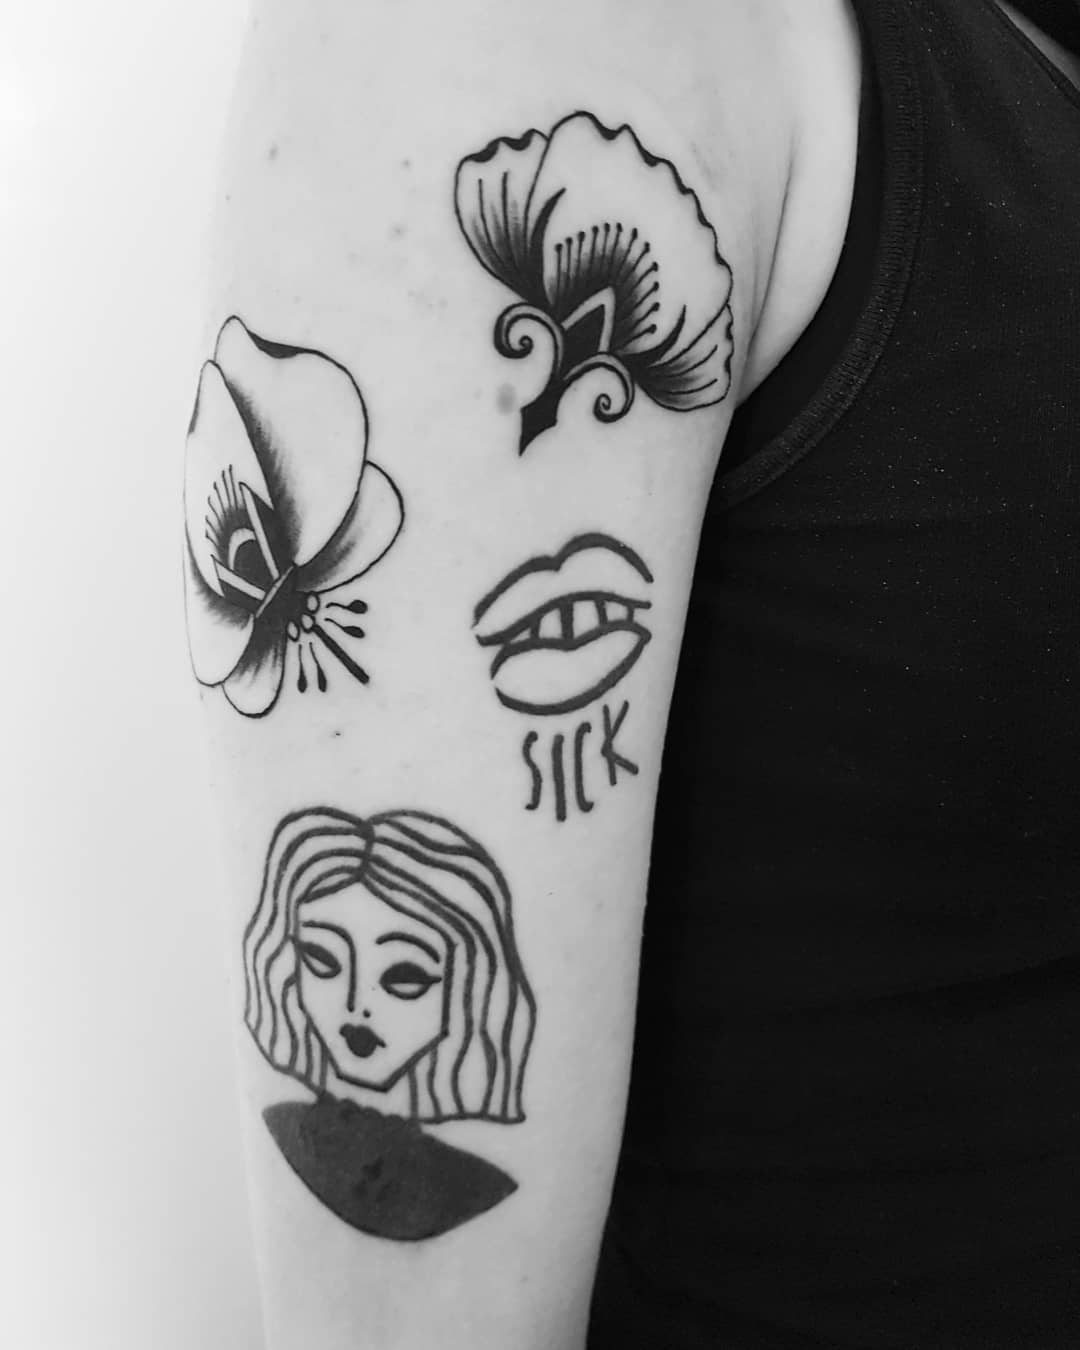 Various tattoos on the right arm